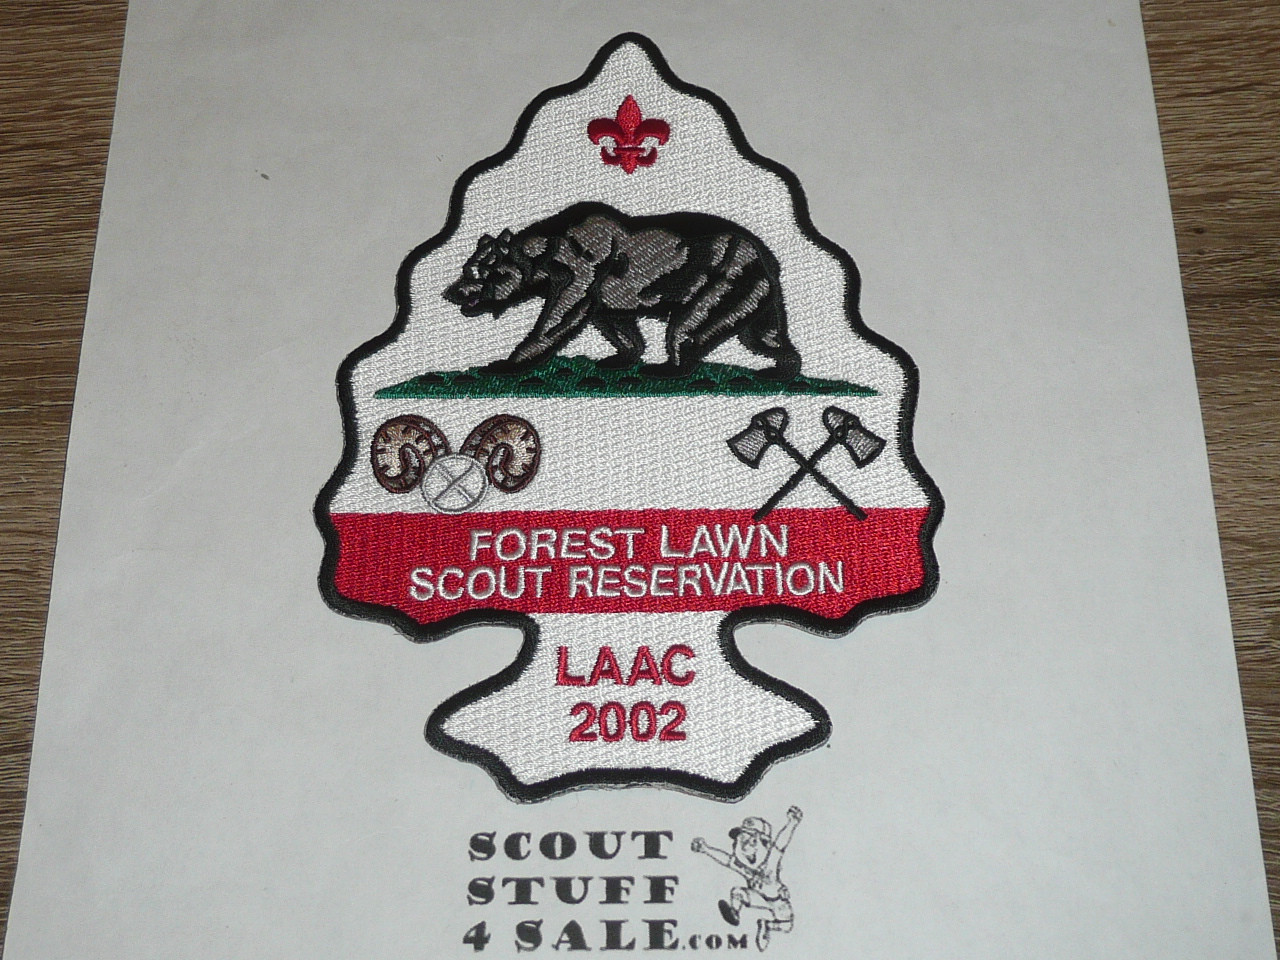 Forest Lawn Scout Reservation STAFF Jacket Patch, black bdr, LAAC, 2002